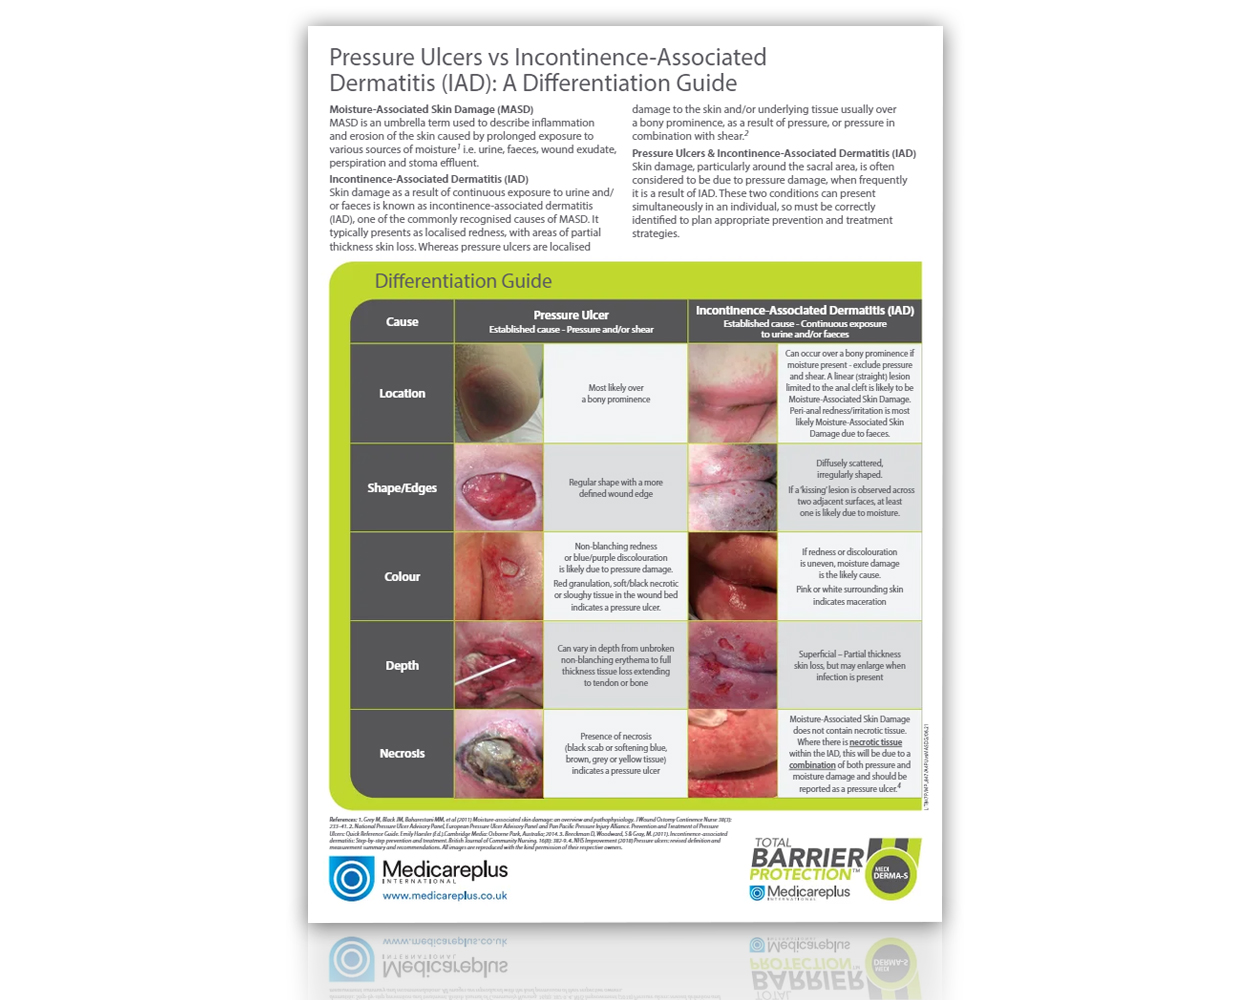 Pressure Ulcers vs Incontinence-Associated Dermatitis: A Differentiation Guide